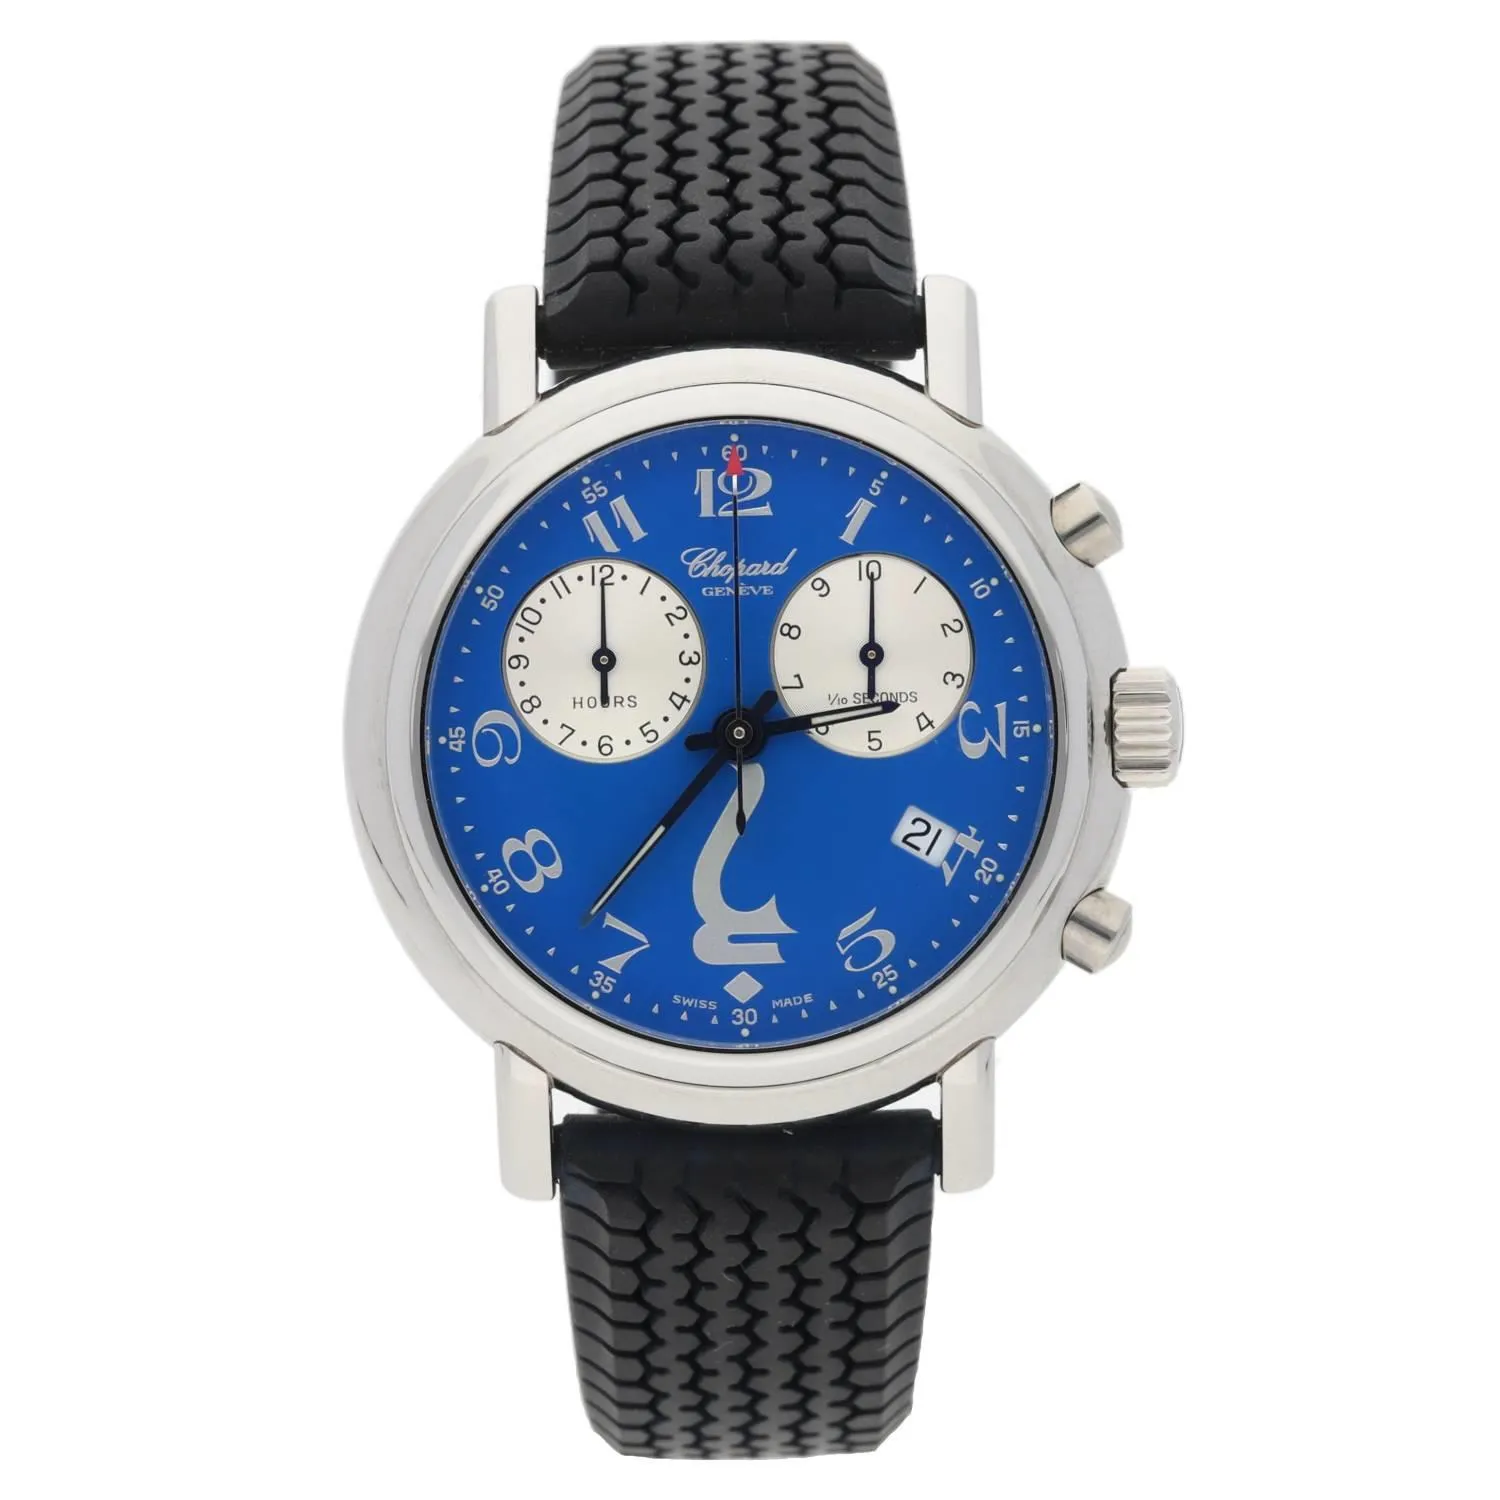 Chopard Mille Miglia 8271 38mm Stainless steel Blue